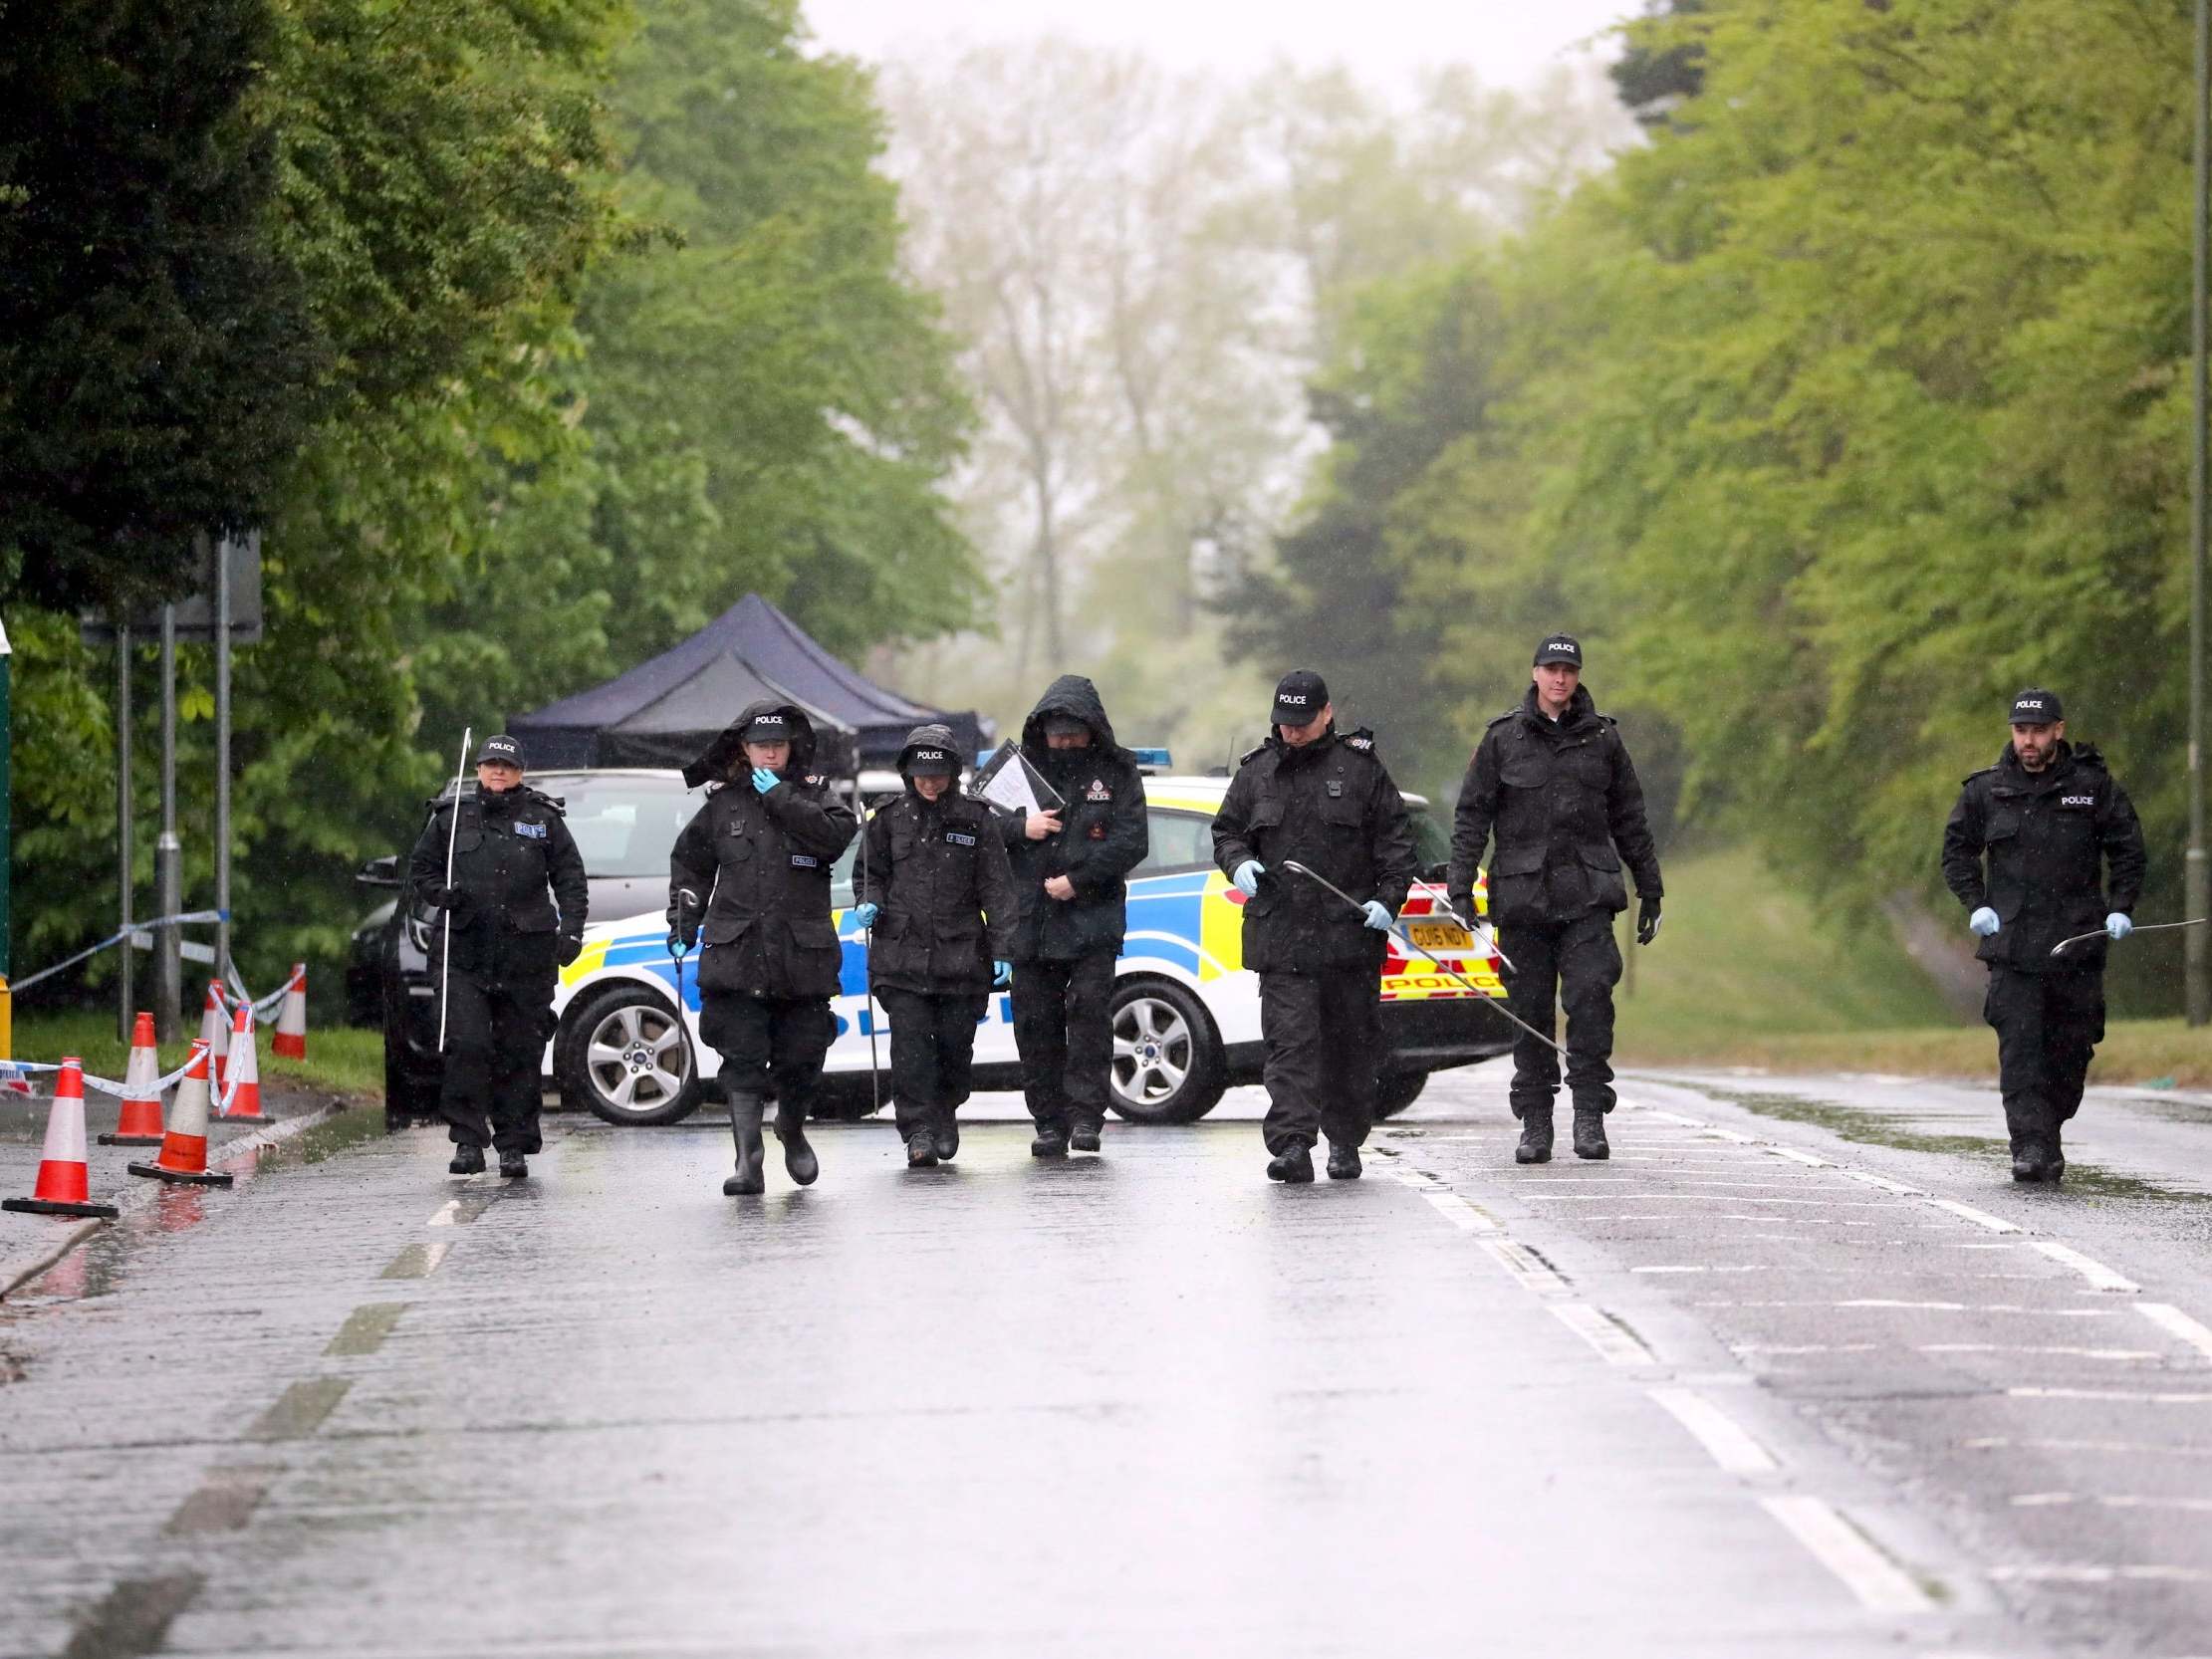 Forensic officers from Surrey Police investigate the suspected murder of an 88-year-old man, named locally as Dennis Kellond, who was found dead at his bungalow in the village of Godstone on 27 April 2020.